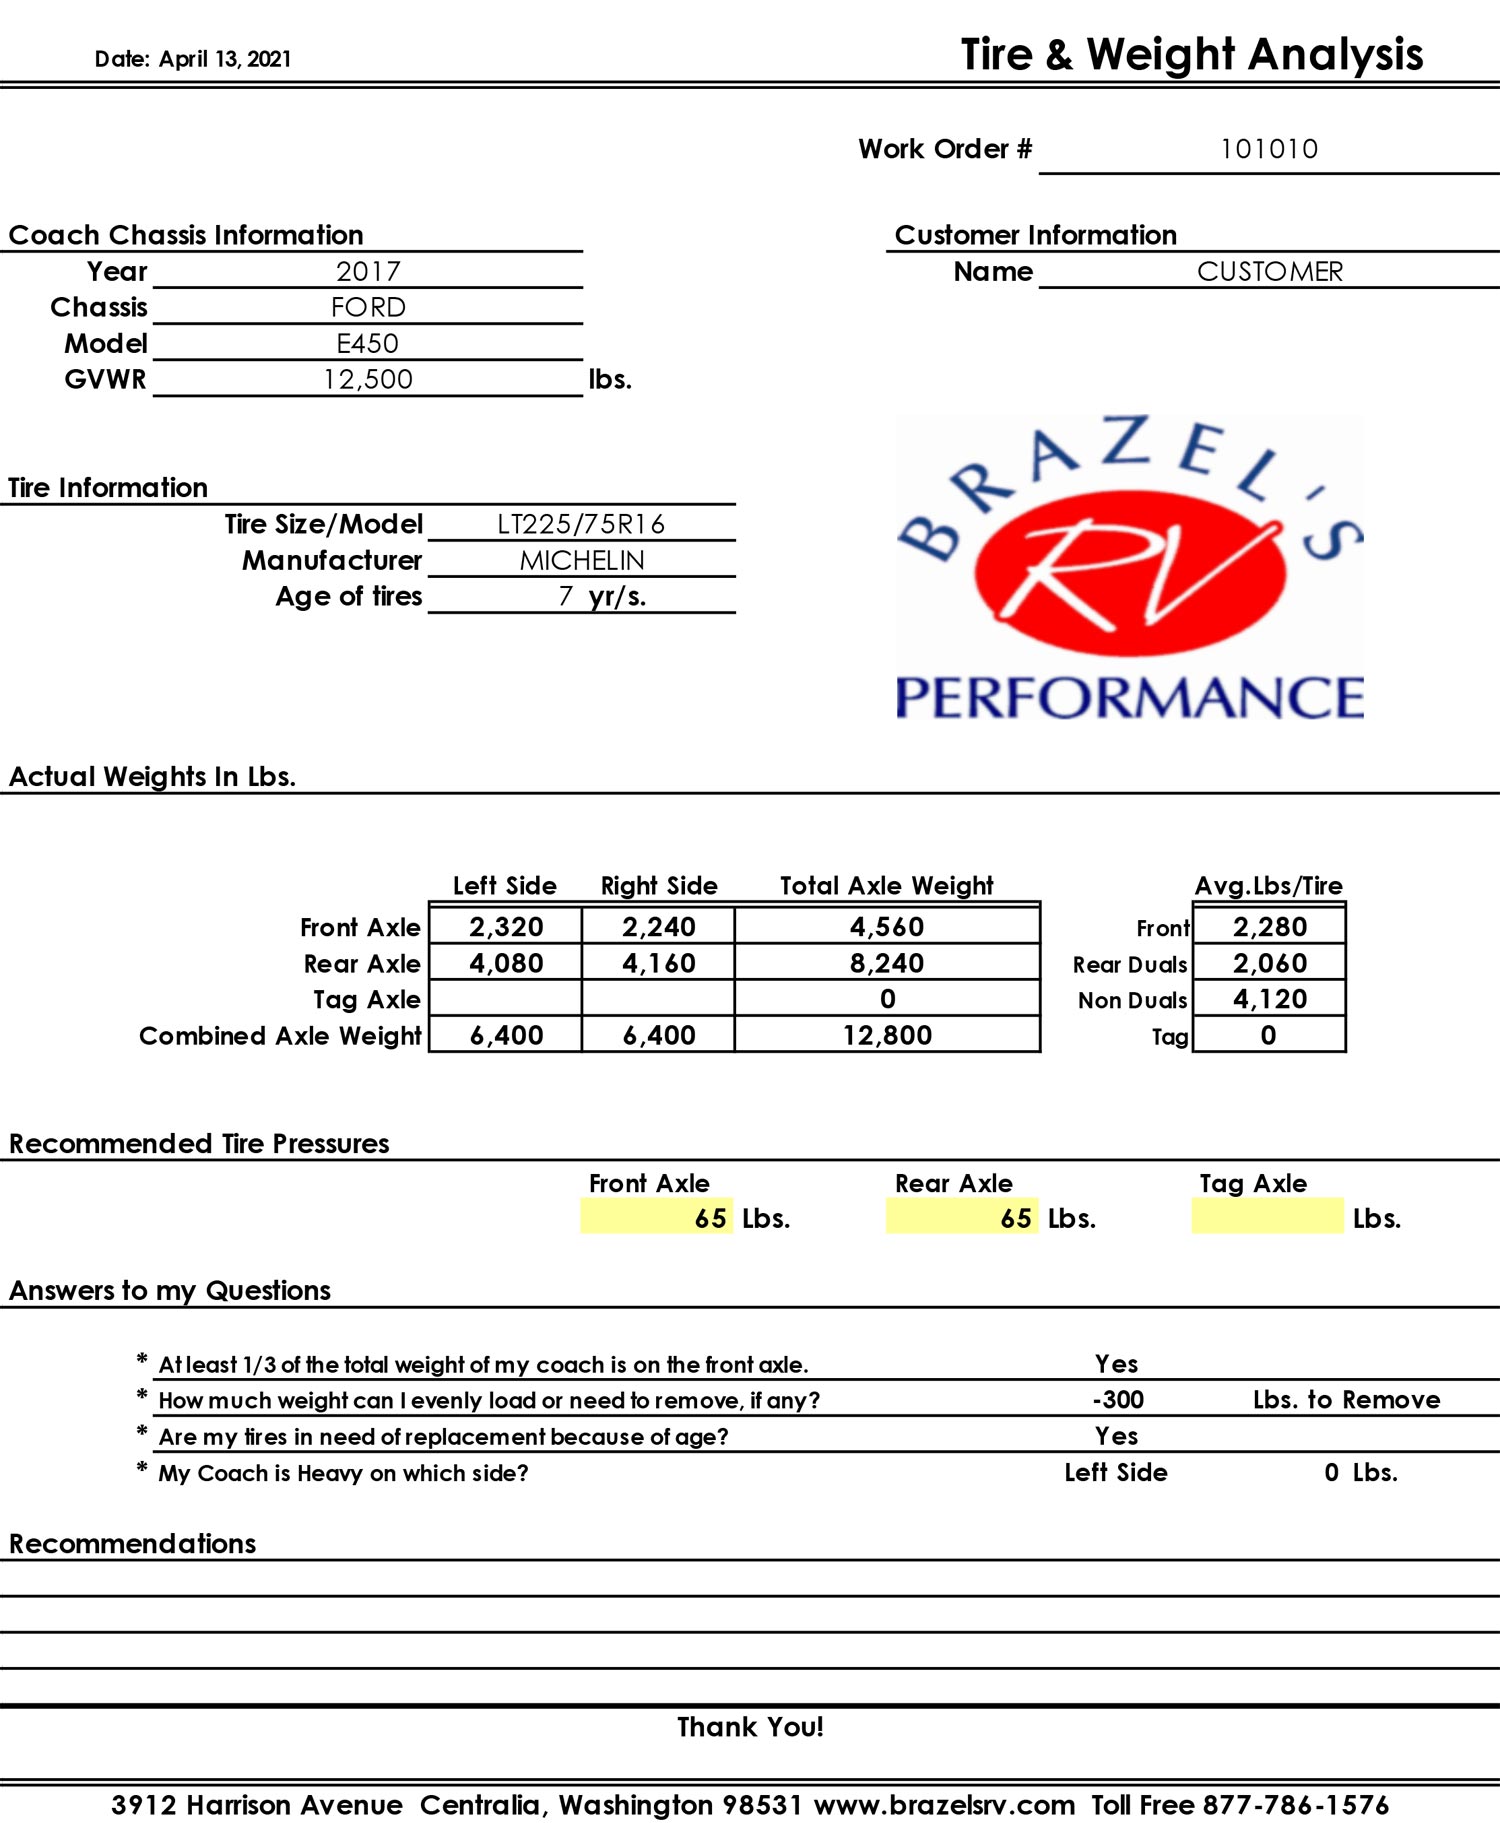 Tire and Weight Analysis Worksheet from Brazel's RV Performance